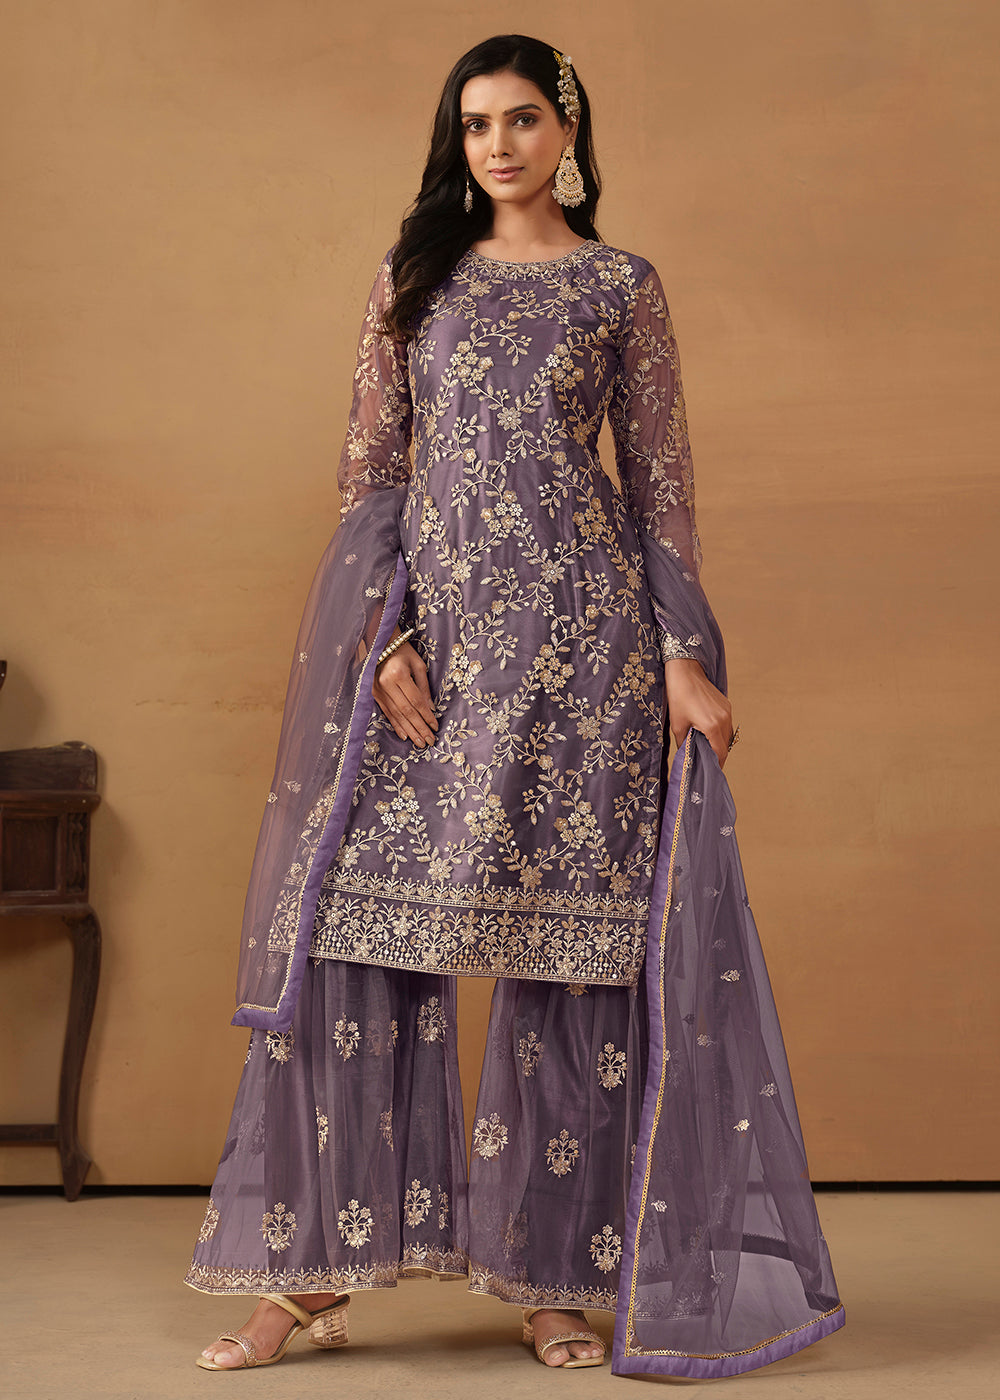 Shop Now Dusty Purple Net Embroidered Wedding Festive Gharara Suit Online at Empress Clothing in USA, UK, Canada, Italy & Worldwide.